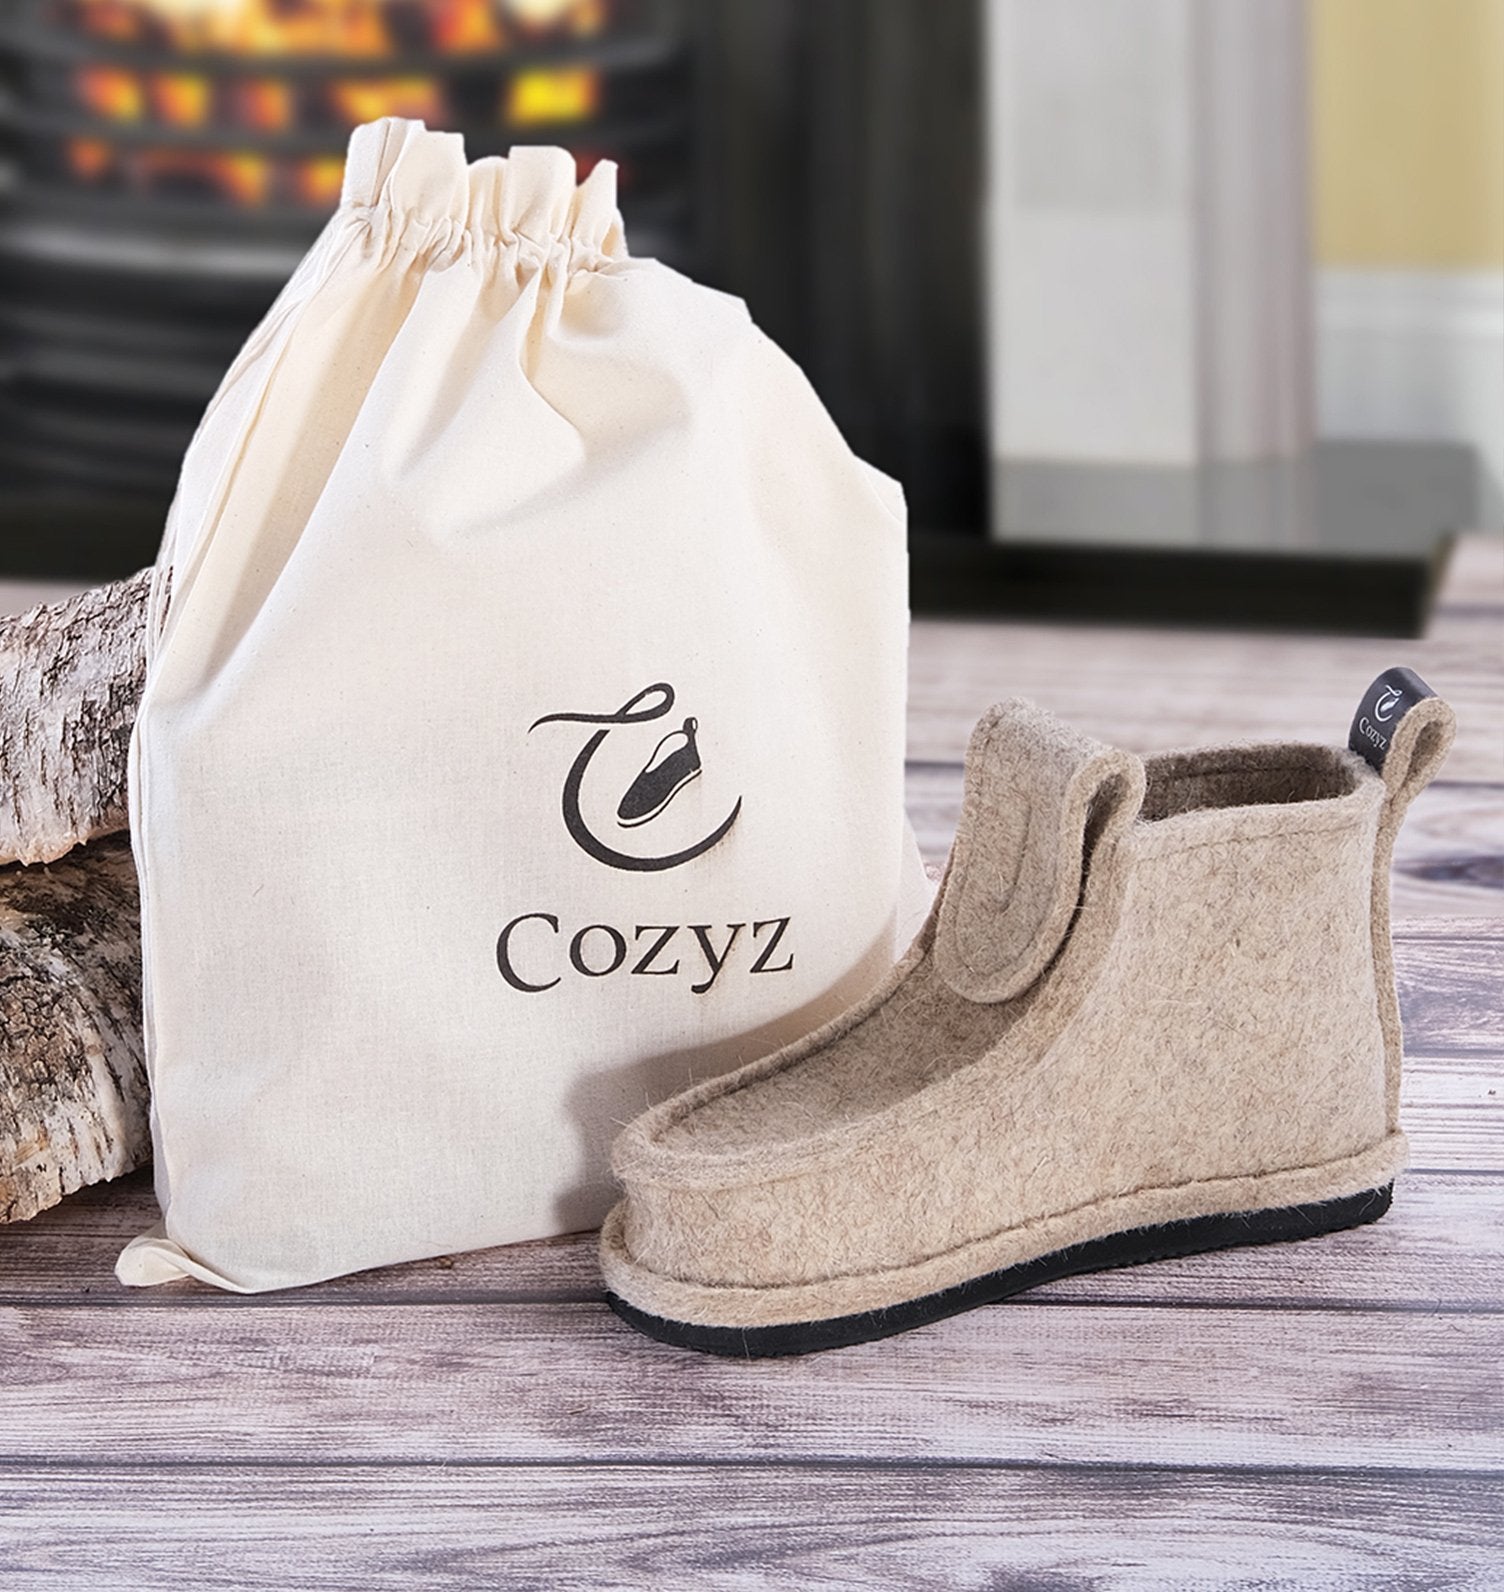 No animals are harmed in the making of Cozyz